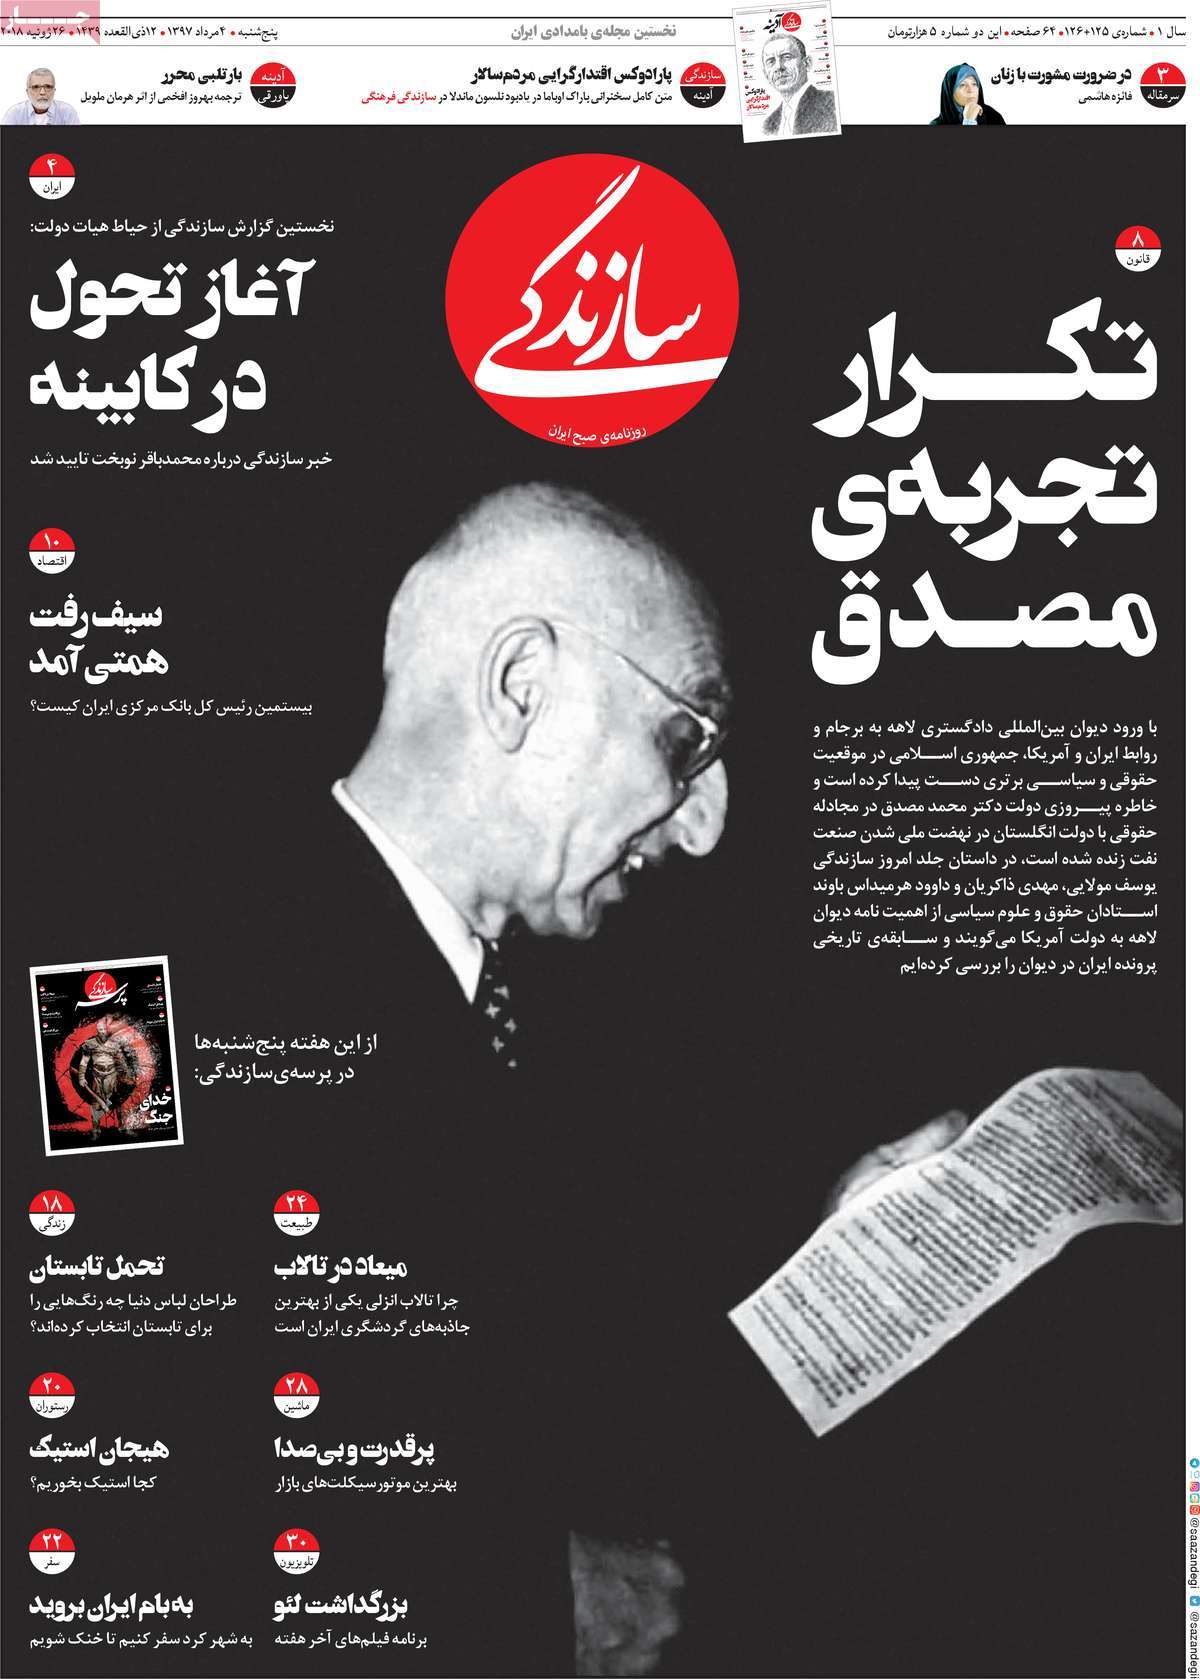 A Look at Iranian Newspaper Front Pages on July 26